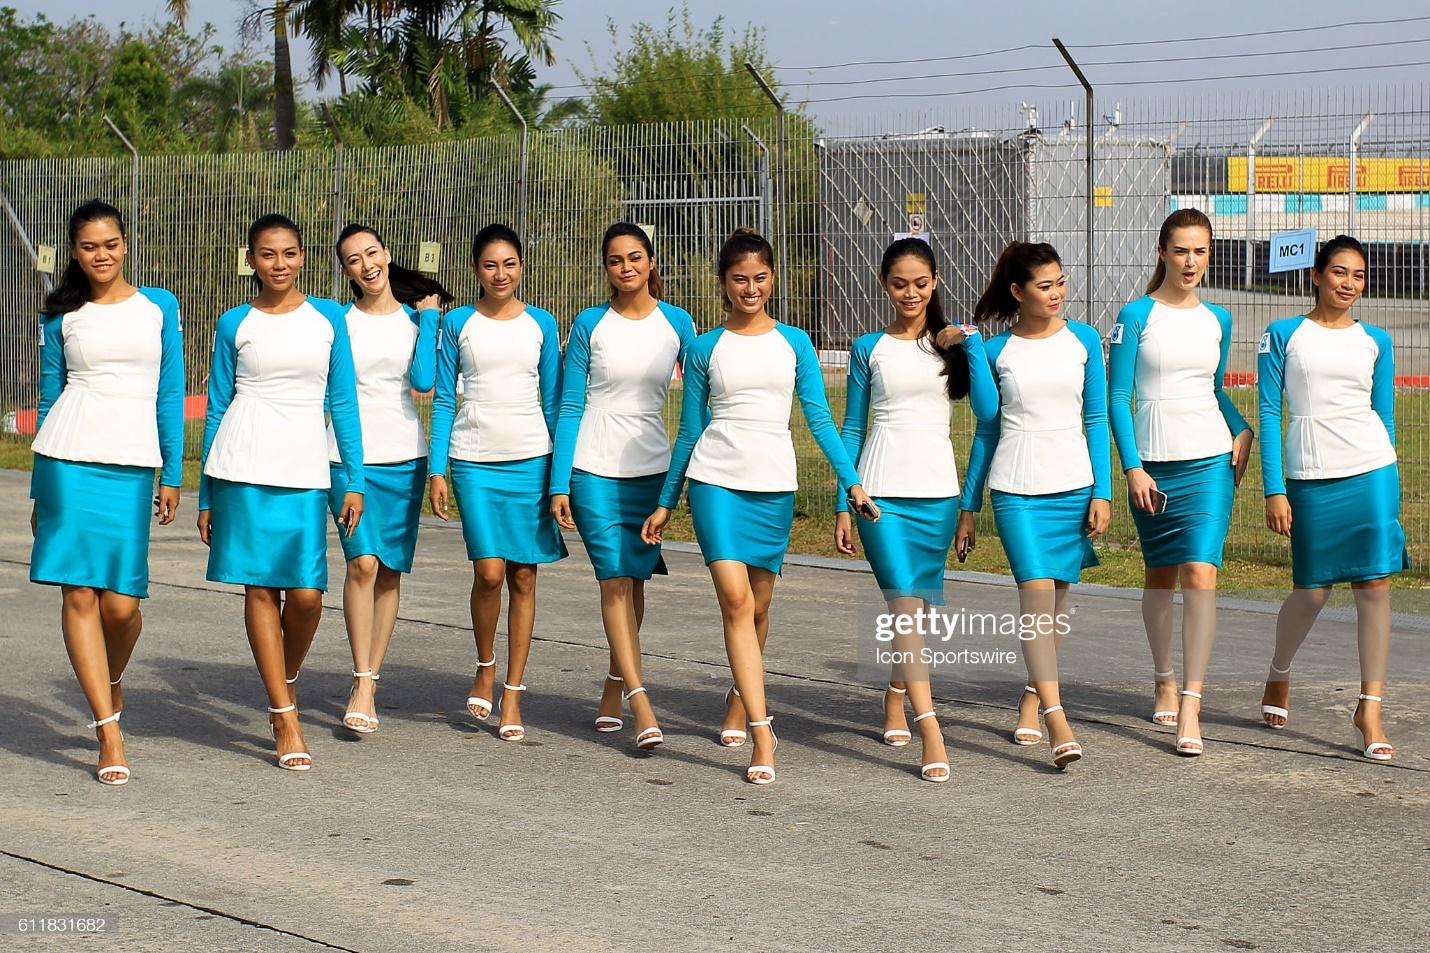 D:\Documenti\posts\posts\Women and motorsport\foto\Getty e altre\october-2016-grid-girls-pose-for-photograph-at-the-paddock-of-the-1-picture-id611831682.jpg